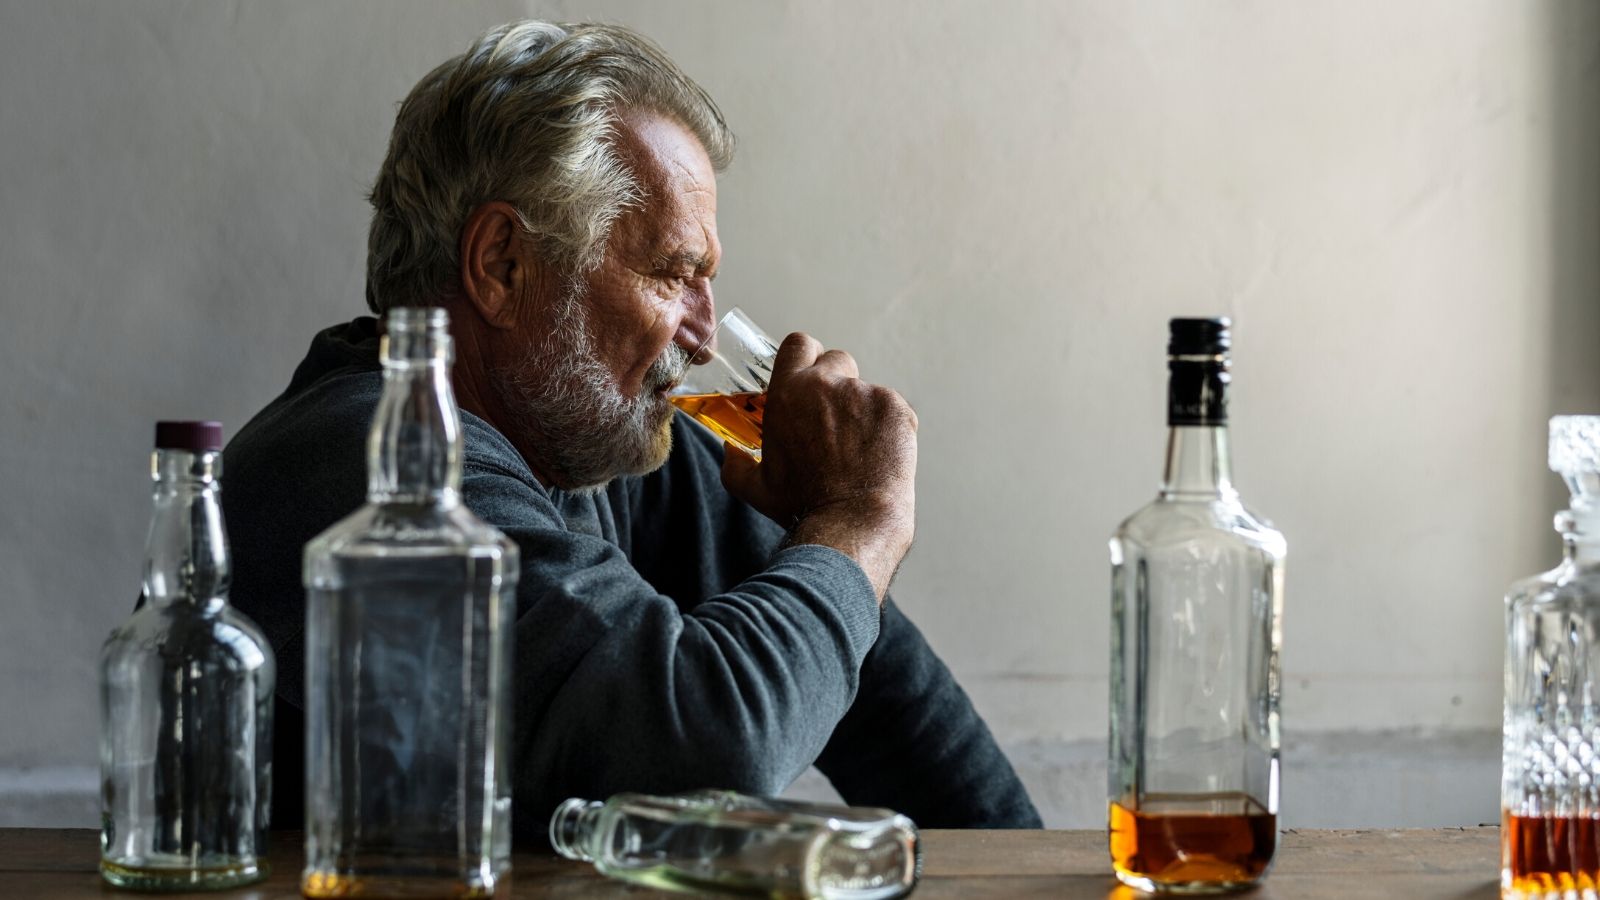 A man with alcohol addiction consumes alcohol.